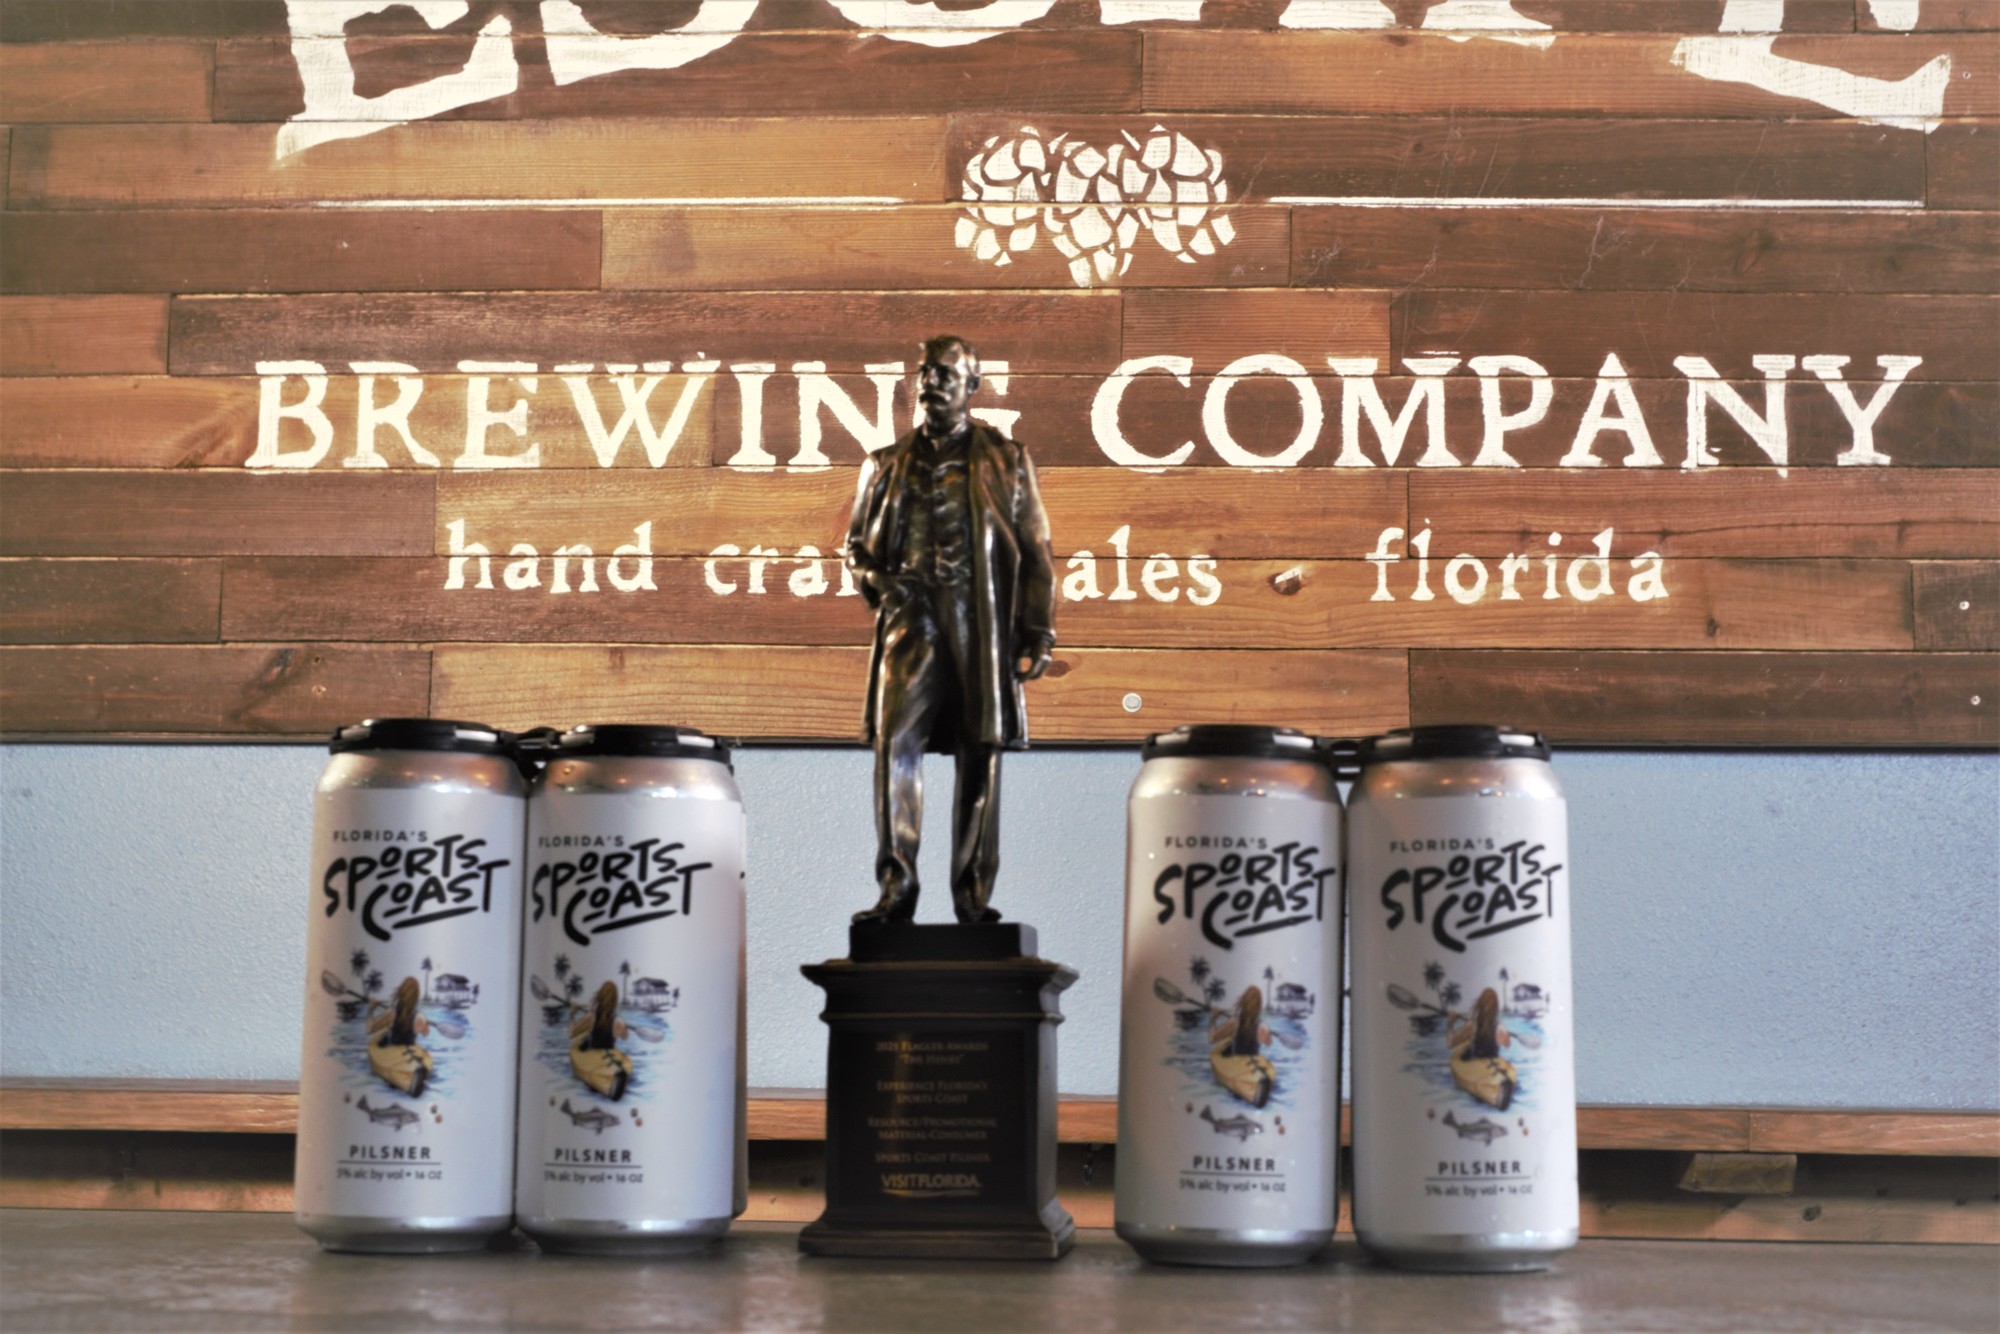 Courtesy. Trinity-based Escape Brewing's Sports Coast Pilsner, a collaboration with Pasco County's destination marketing organization, won a Henry Award from Visit Florida.